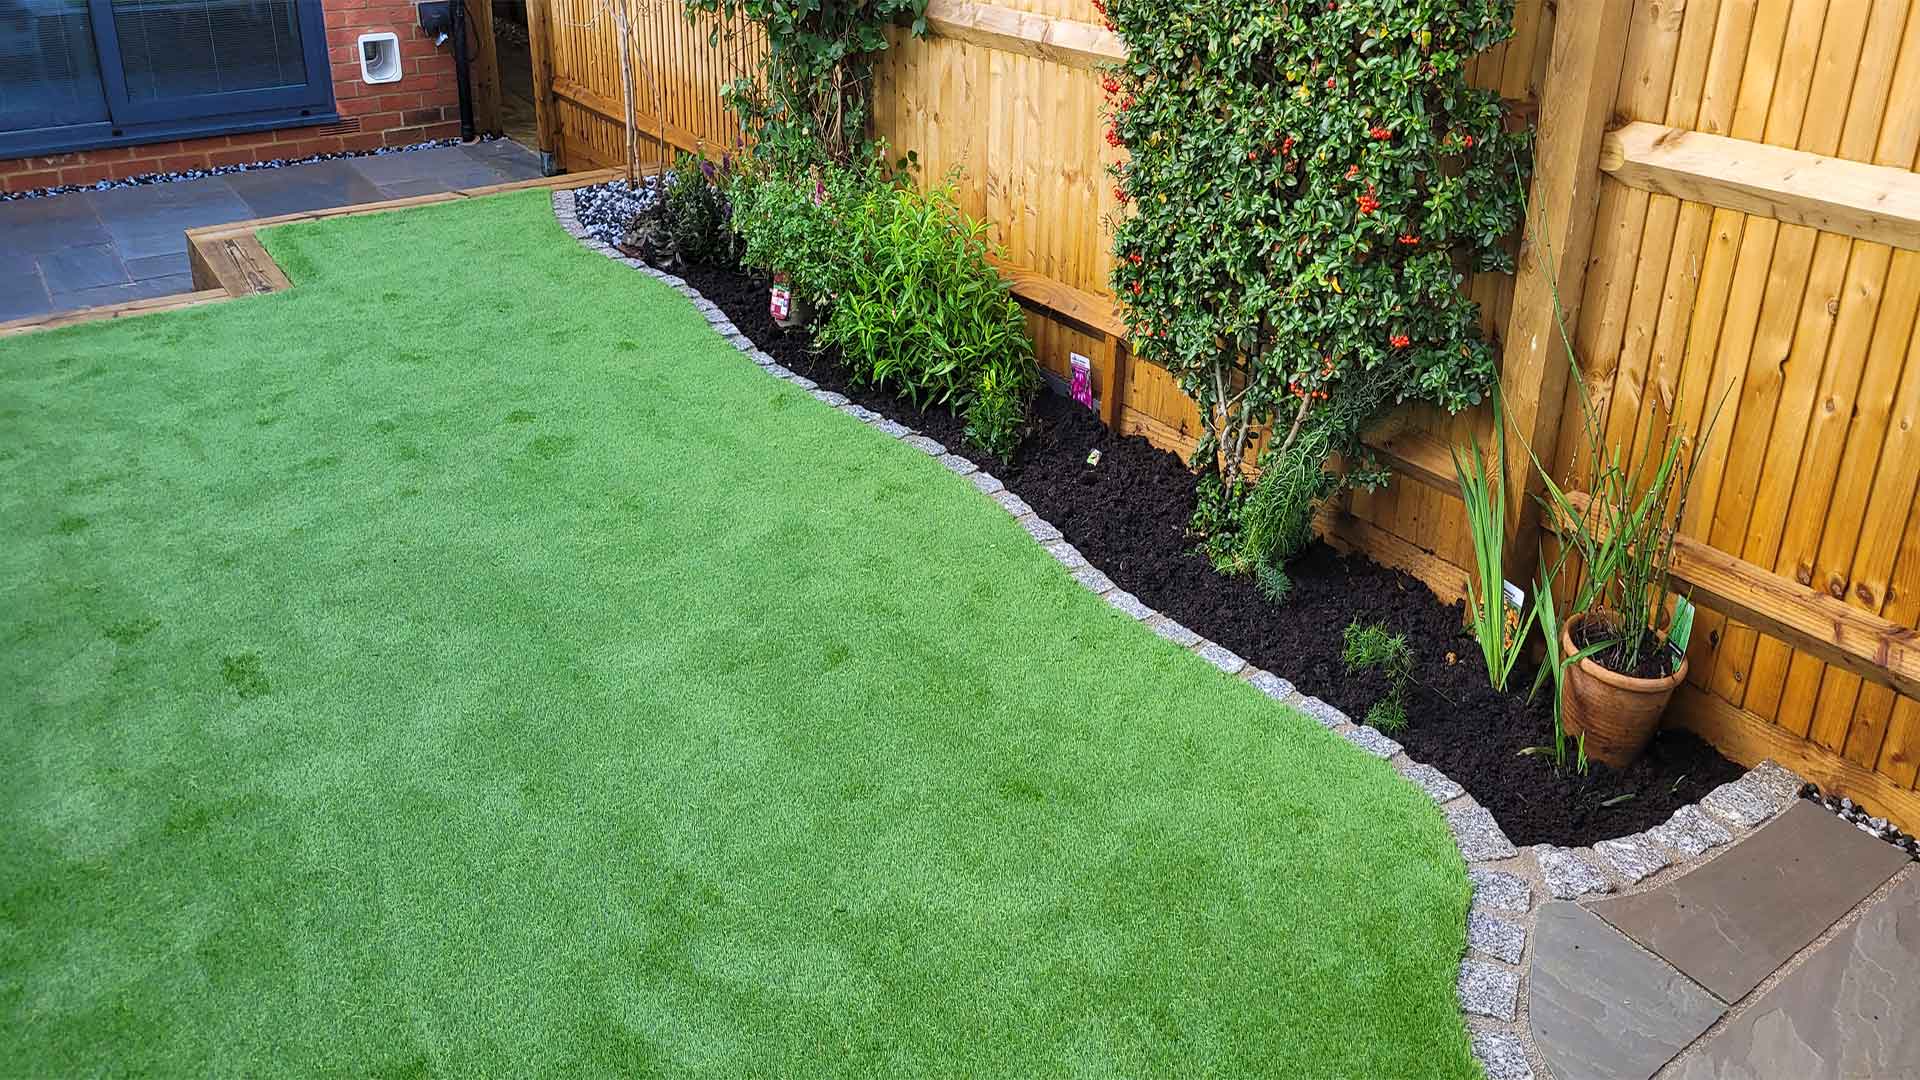 flower-bed-and-artificial-grass-photo-8